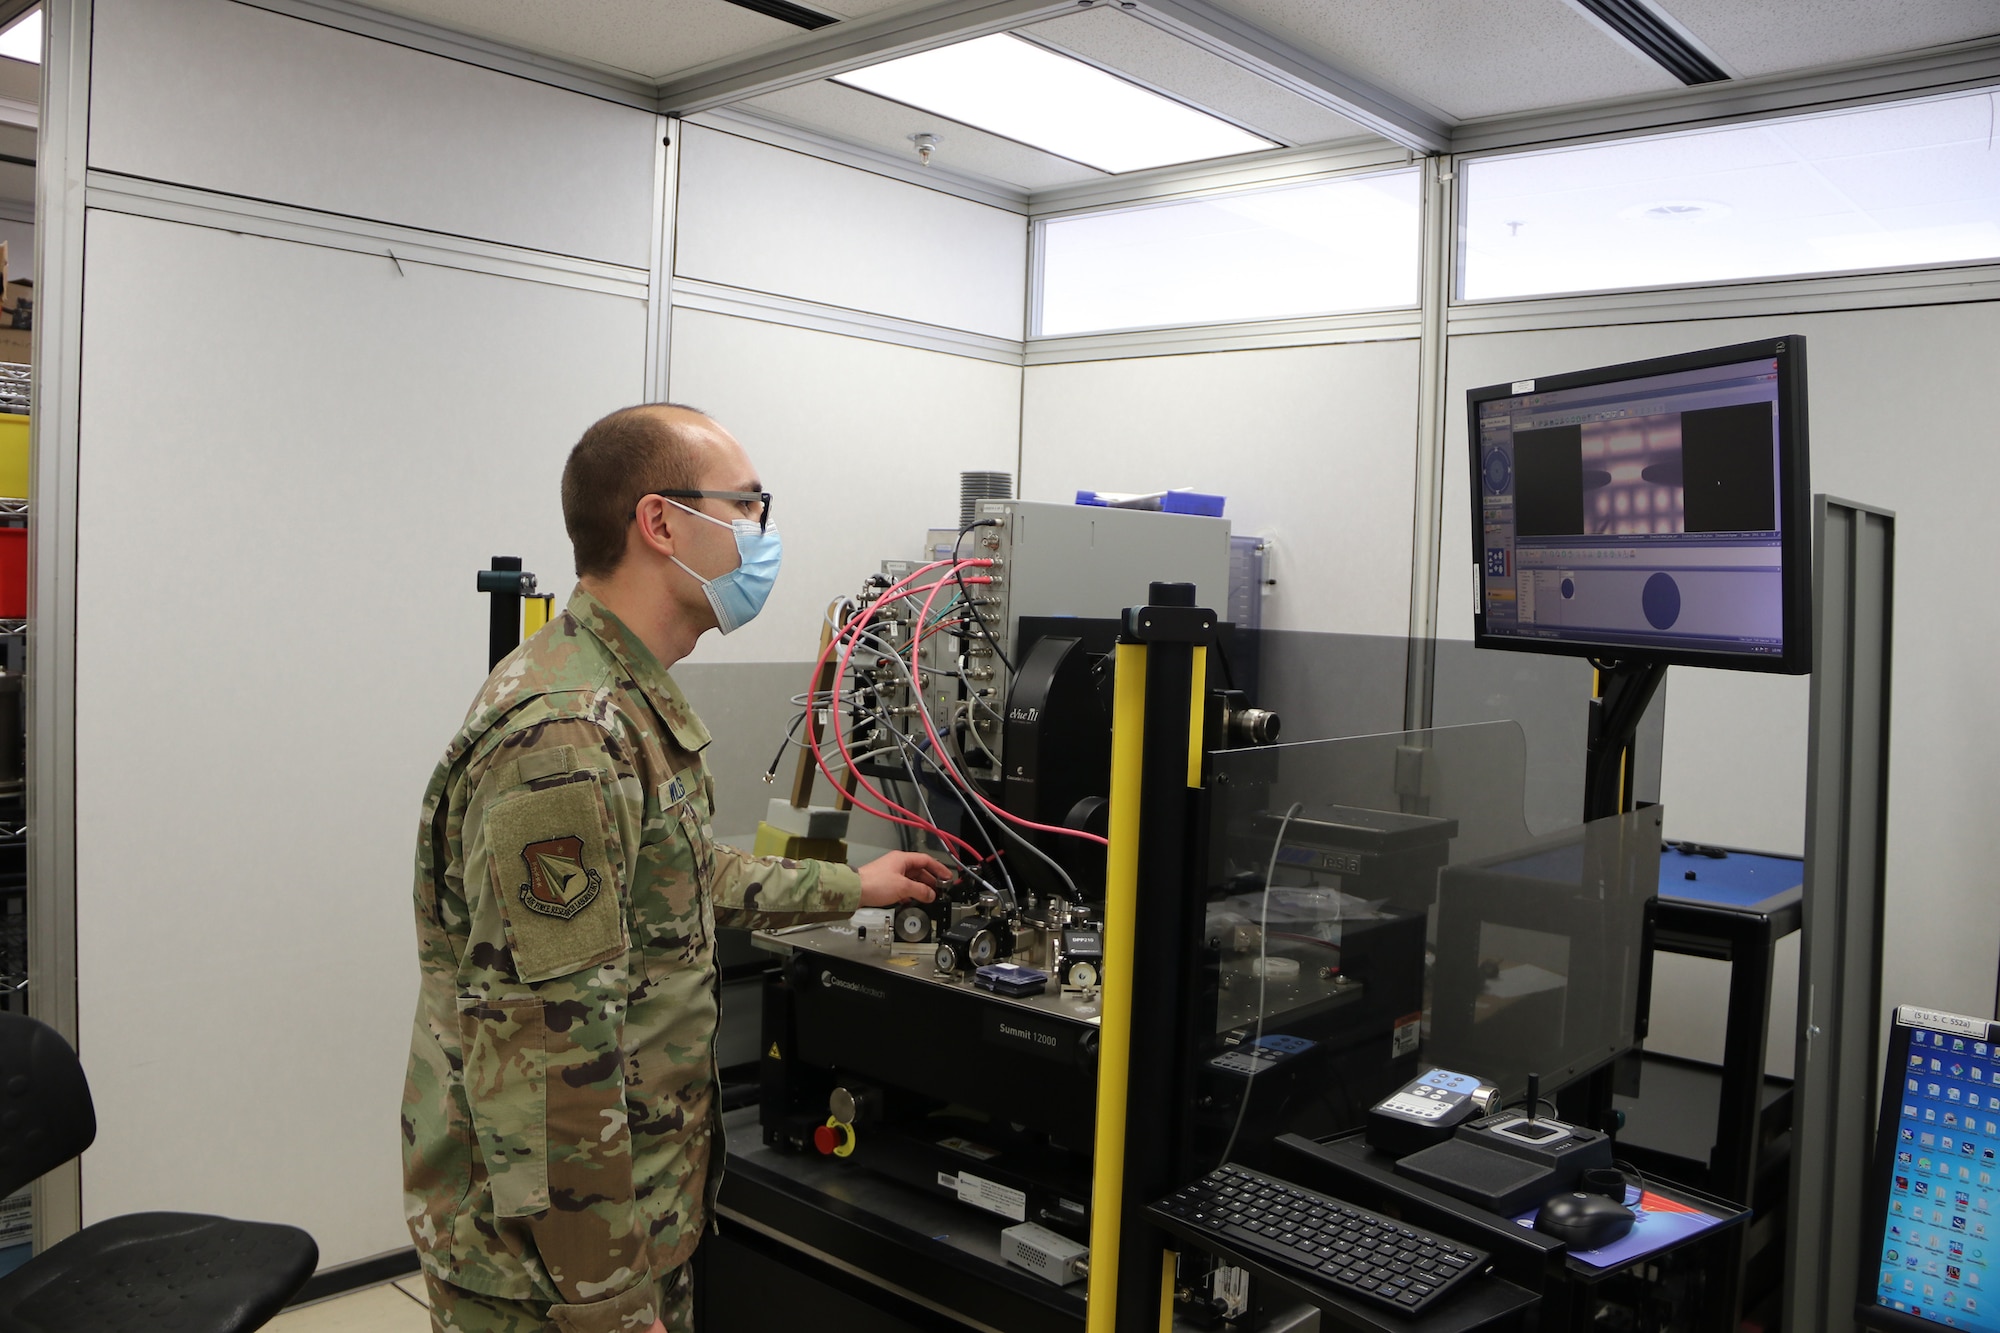 First Lt. Jeremiah Williams of the Air Force Research Laboratory’s Sensors Directorate is using an Edison Grant to lead experiments with Gallium Oxide, a material that may improve the performance of power switches. (U.S. Air Force photo/Michael Ross)